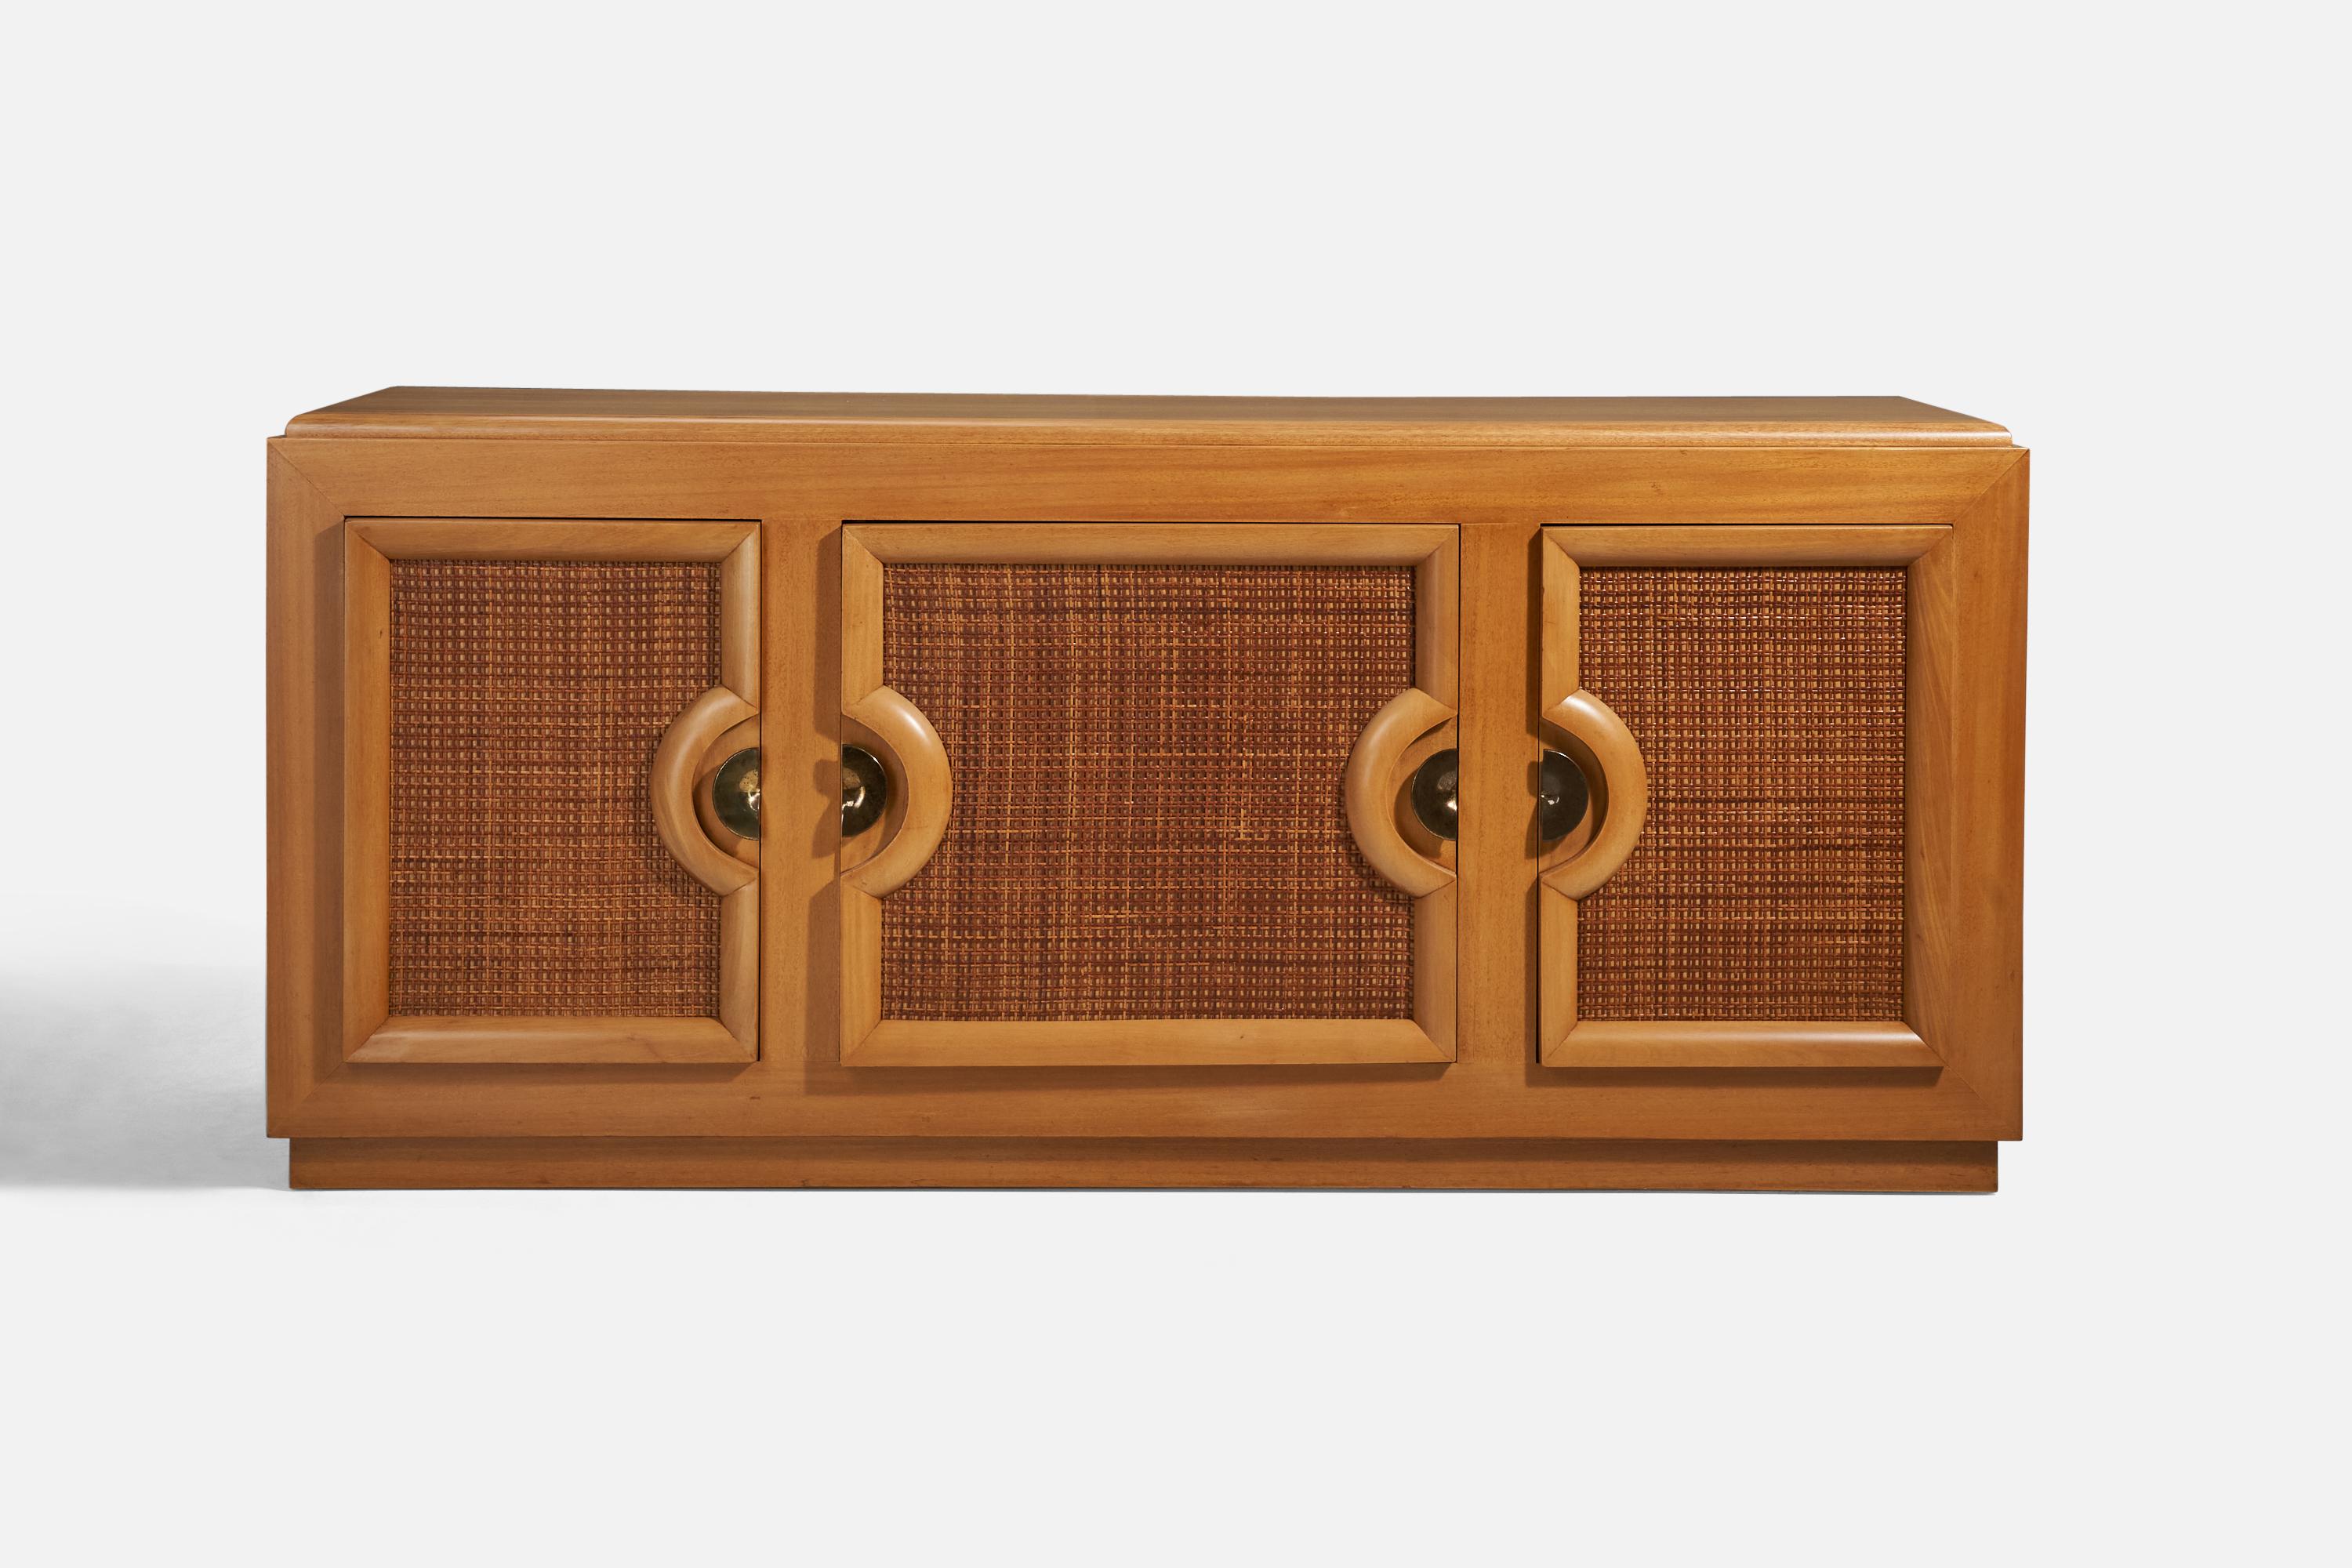 A wood, brass and rattan cabinet designed and produced in the United States, 1940s.